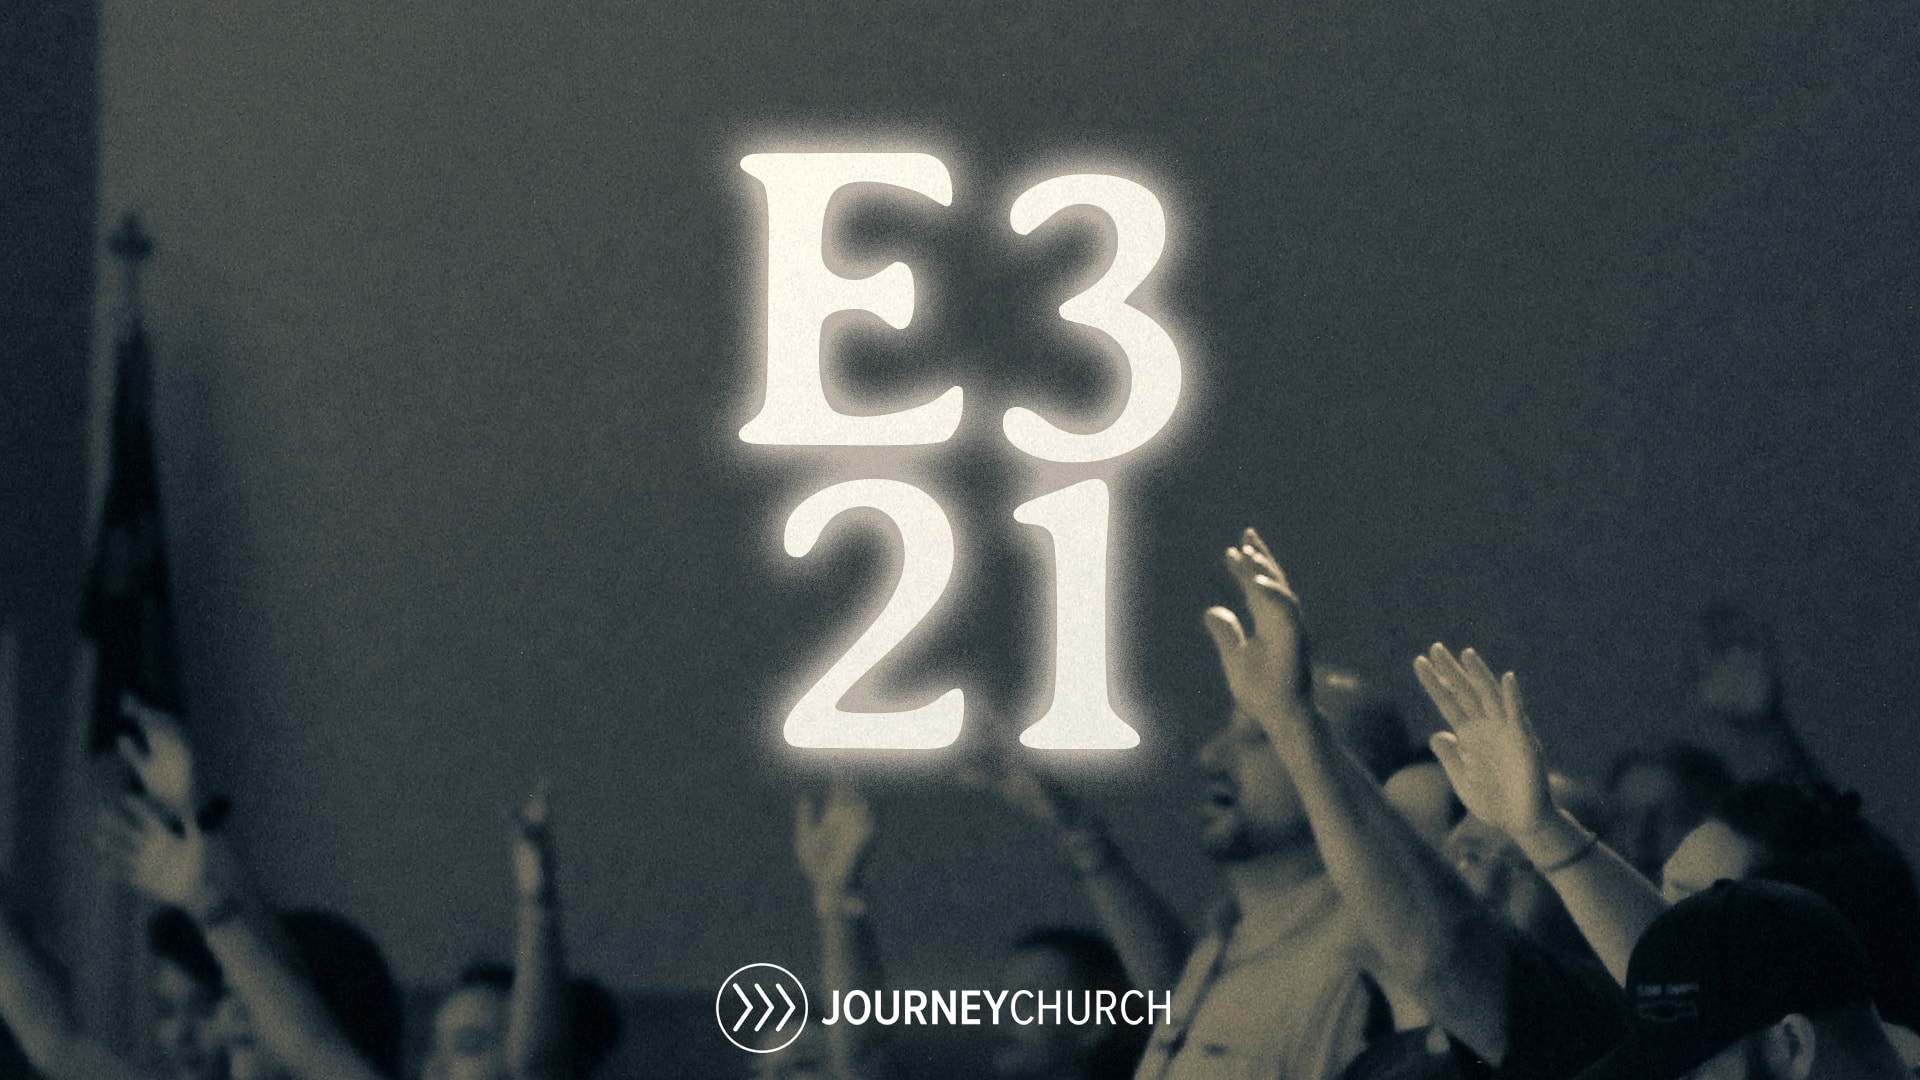 Featured image for “E3 21 – Second Sunday”